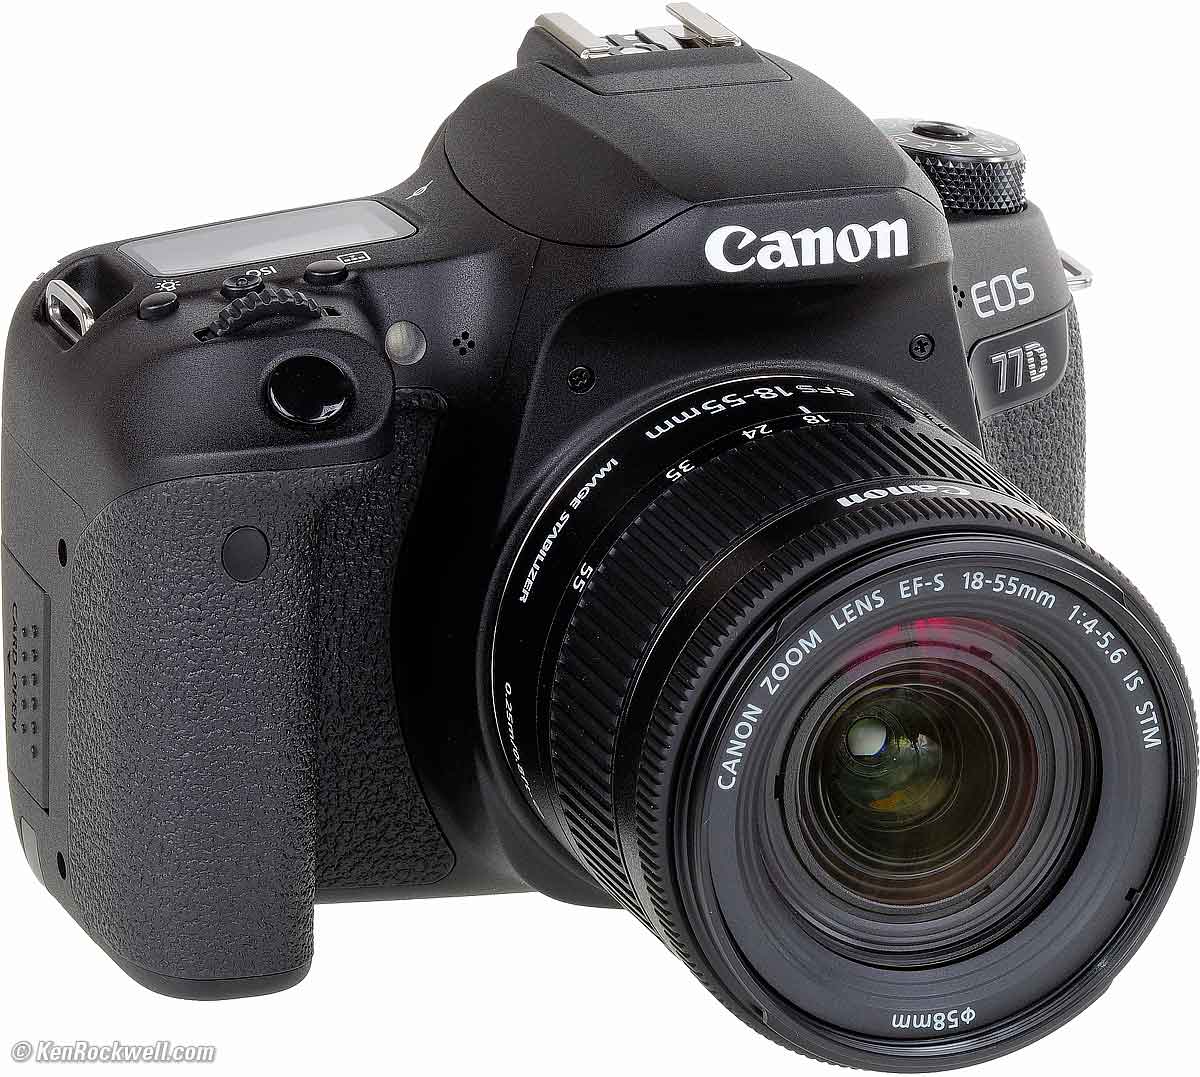 Grand Bedachtzaam thee Canon 77D (EOS9000D) Review